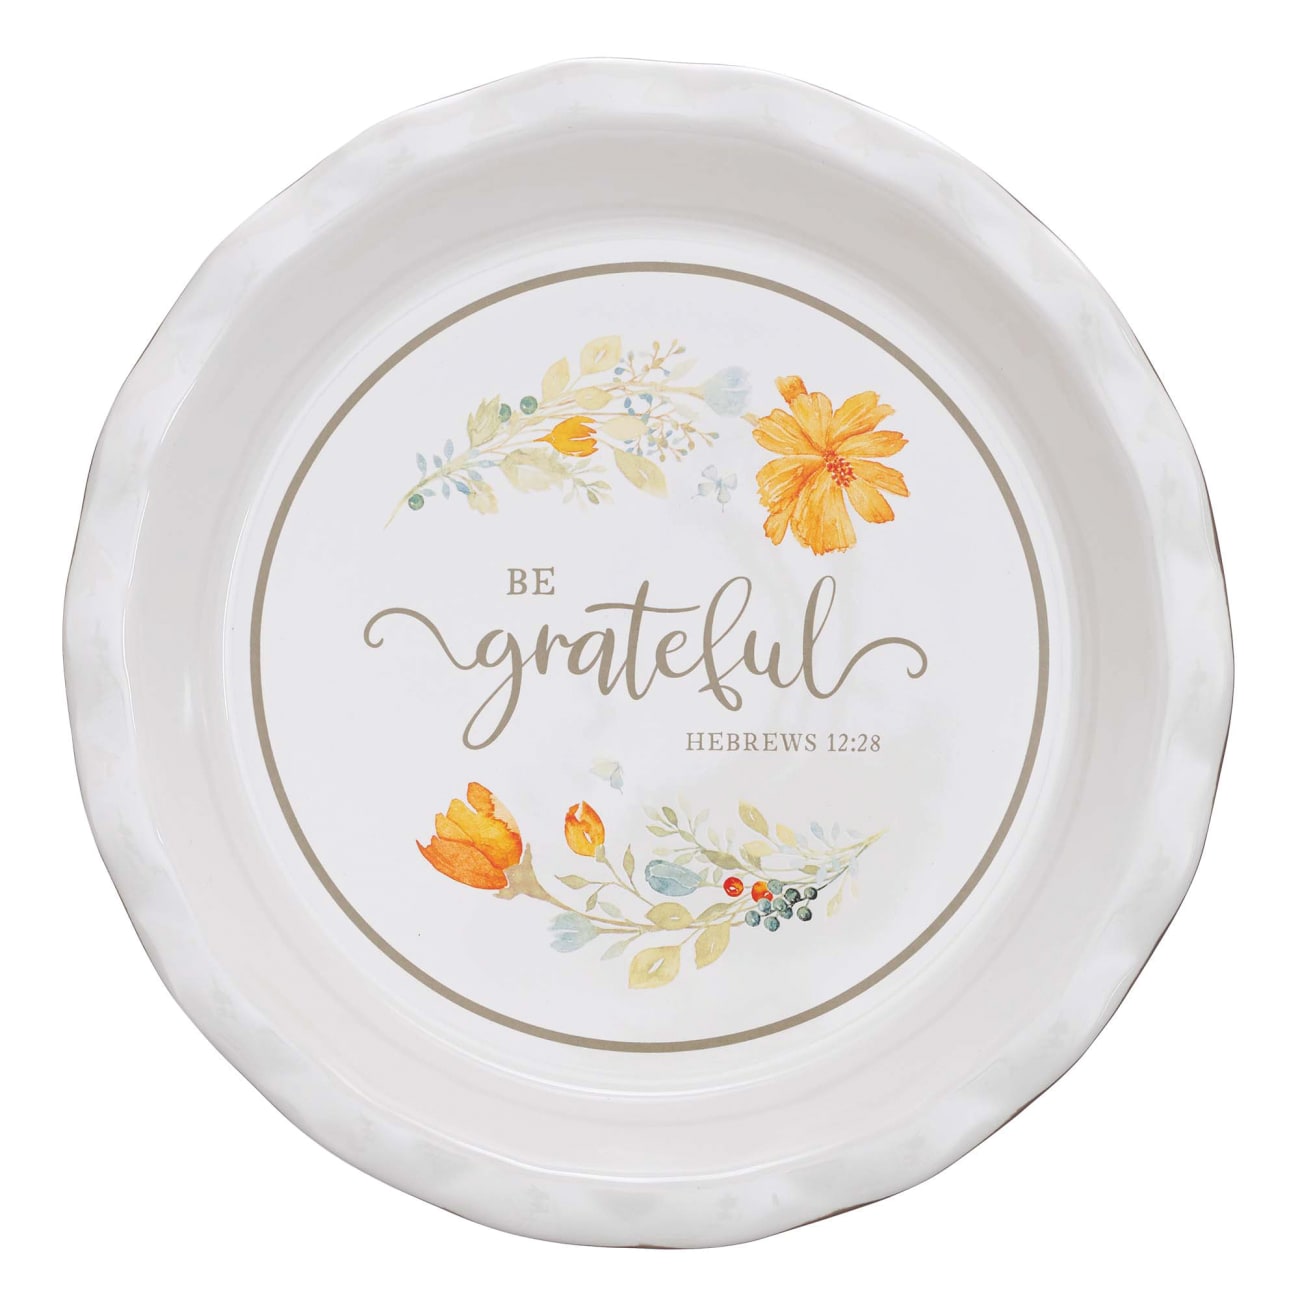 Ceramic Pie Plate- Be Grateful, White With Scalloped Edge and Flowers (Grateful Collection) Homeware